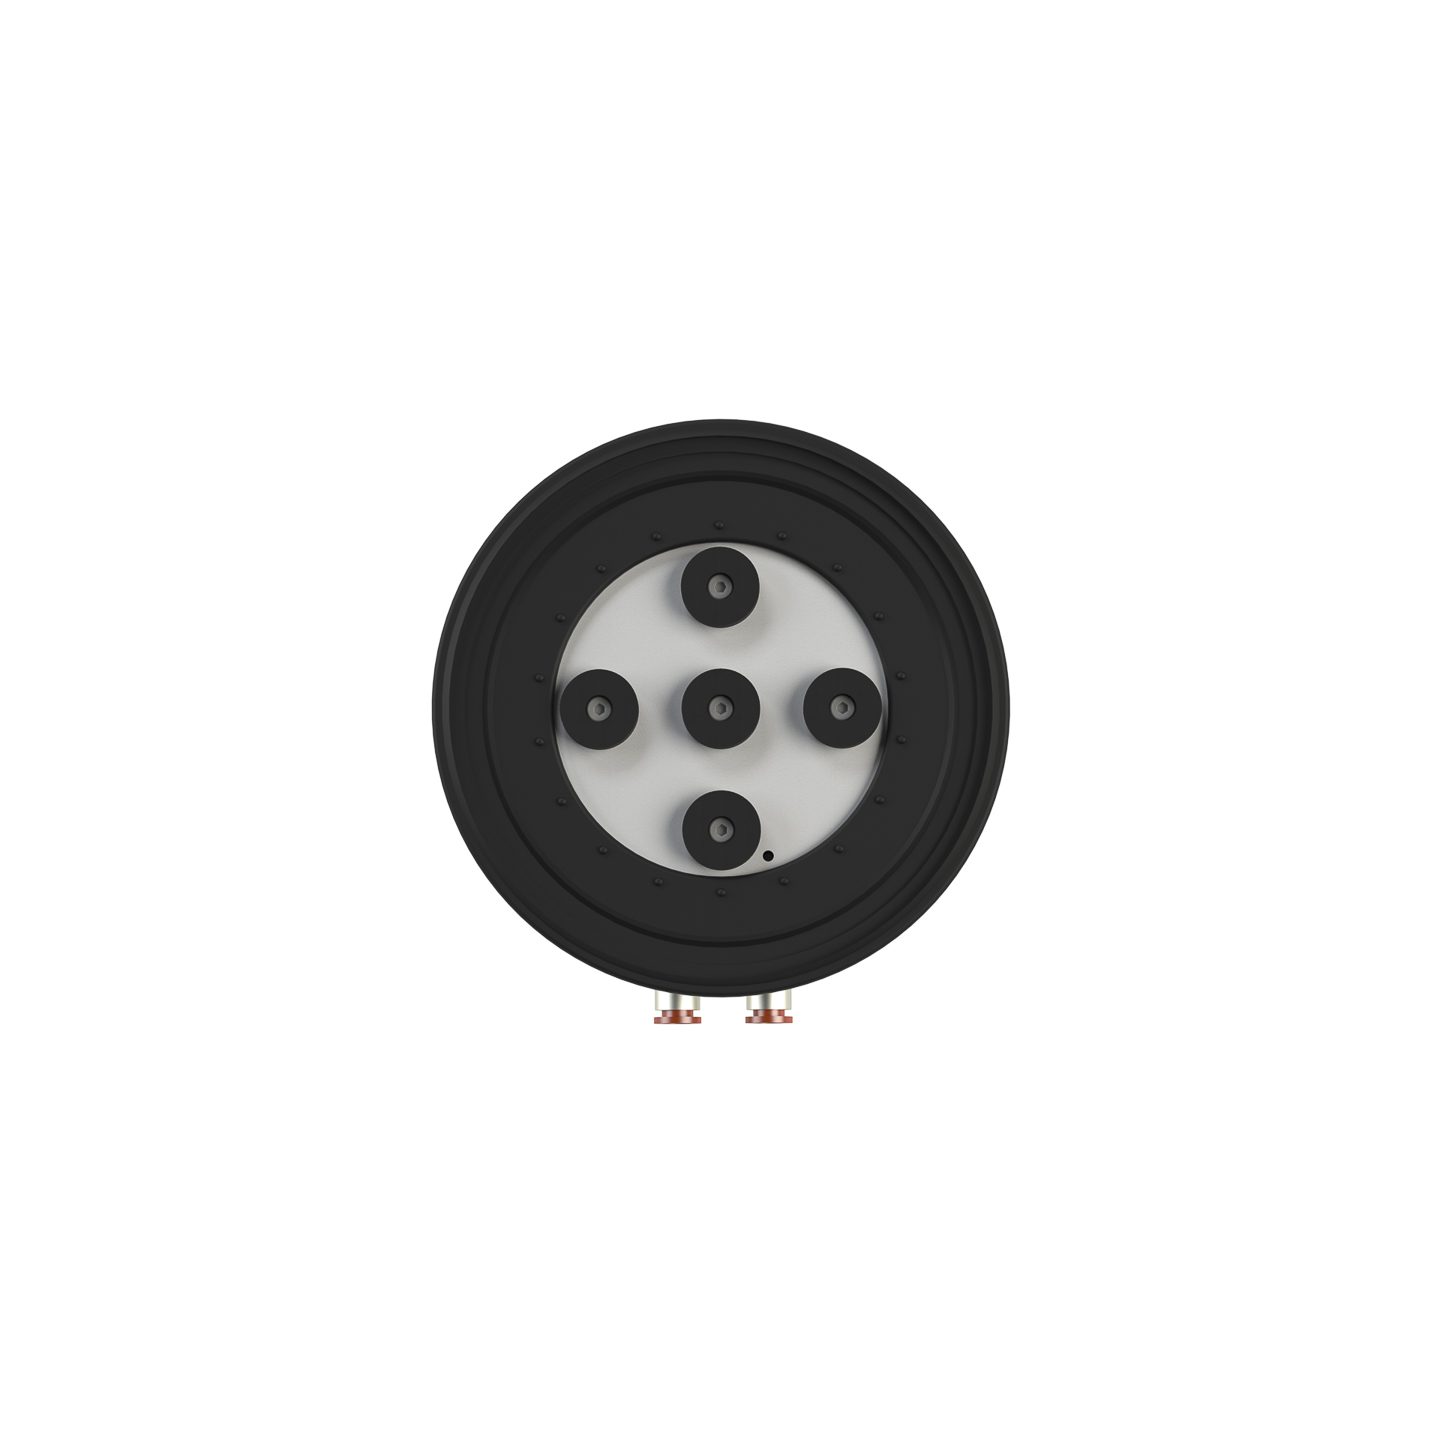 160 mm Round Low-Profile Suction Cup by Blick Industries